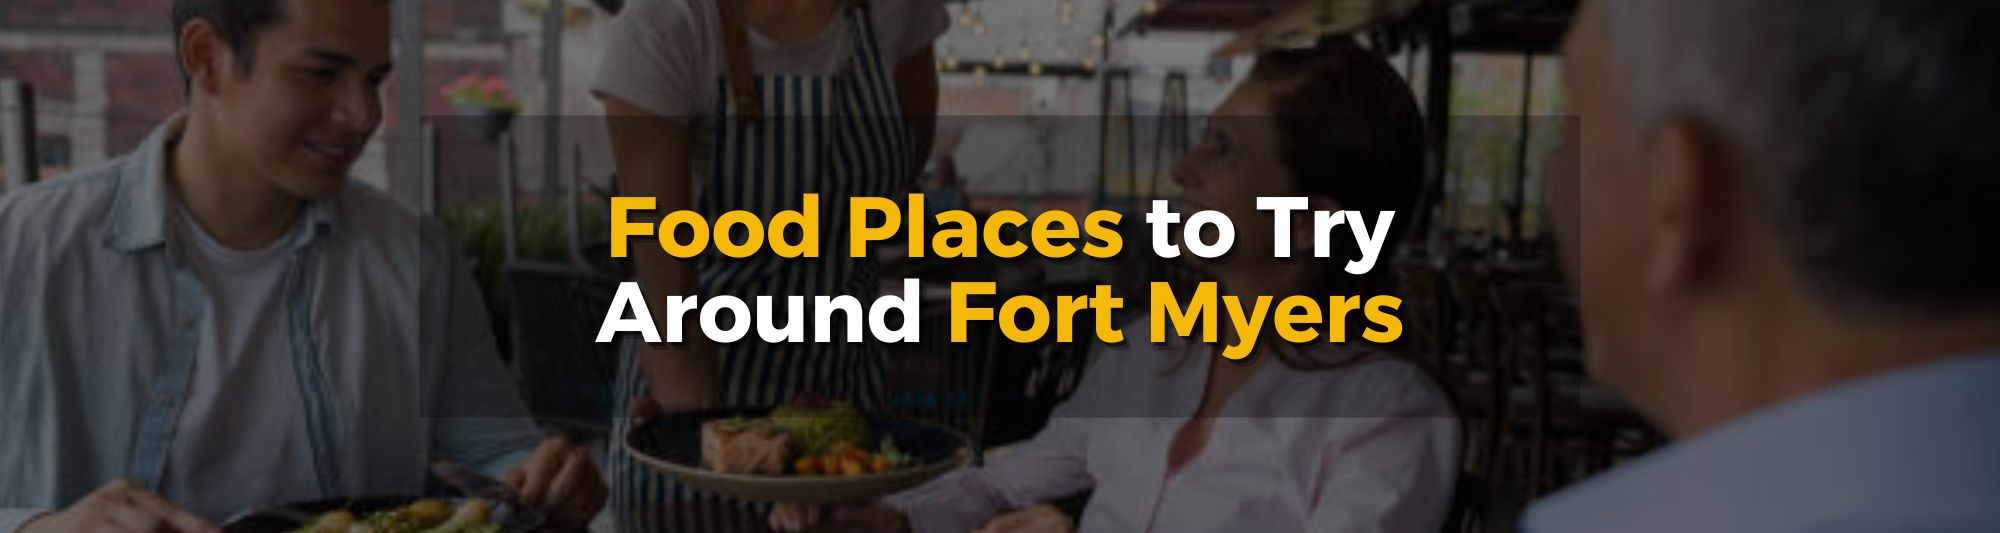 Blog post photo of food places to try around fort myers in southwest florida.